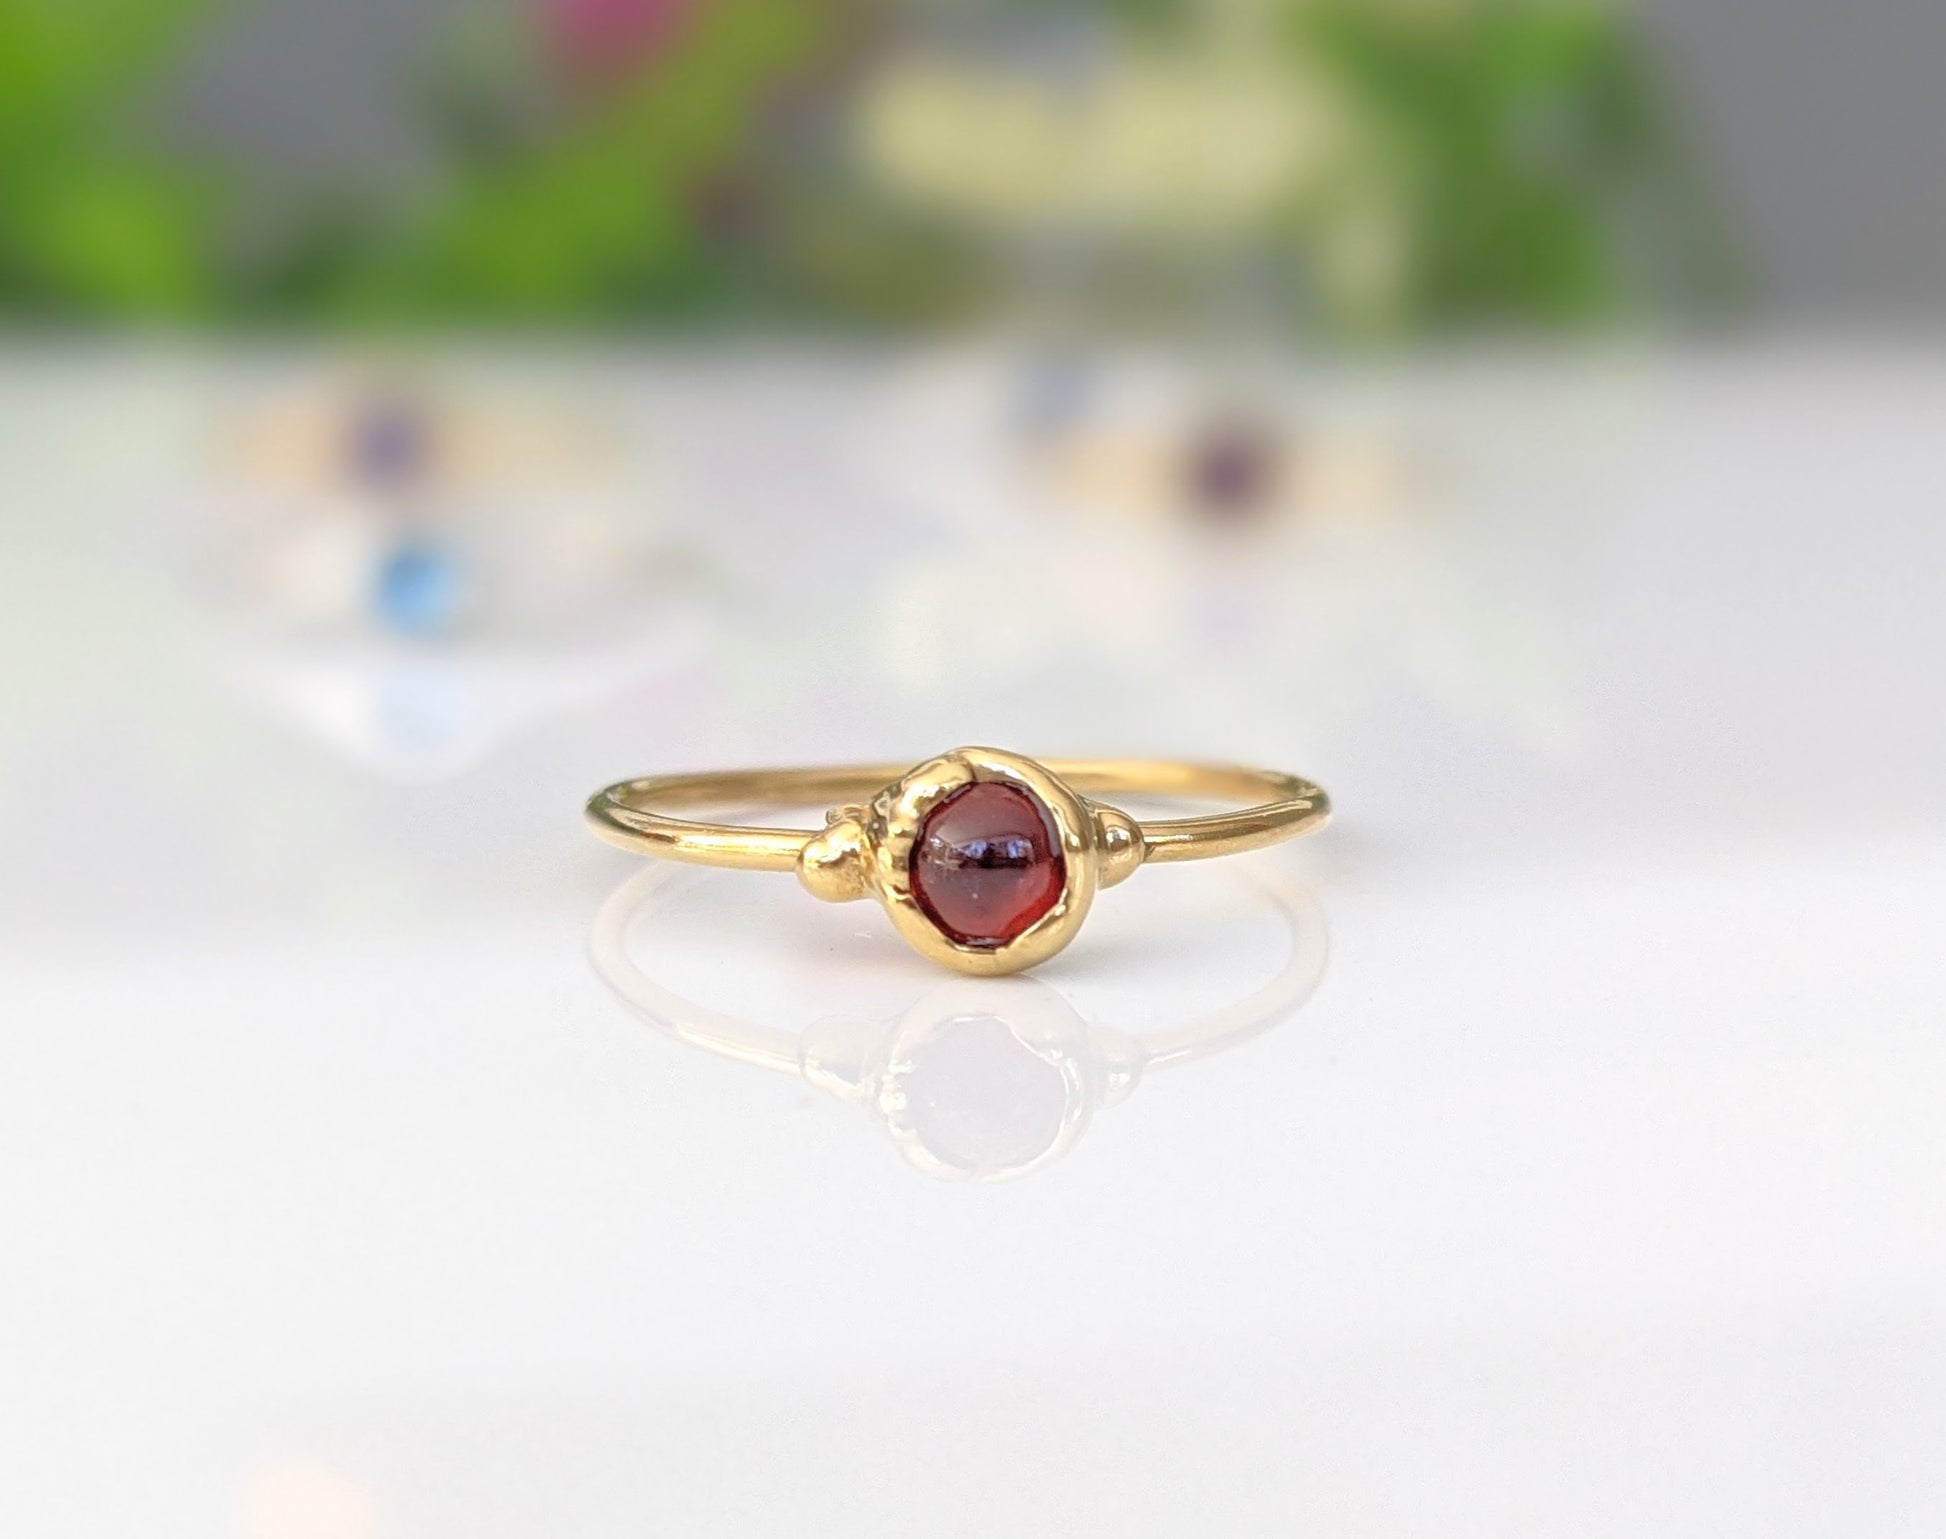 Dainty Garnet January birthstone stacking rings in unique 18k Gold setting